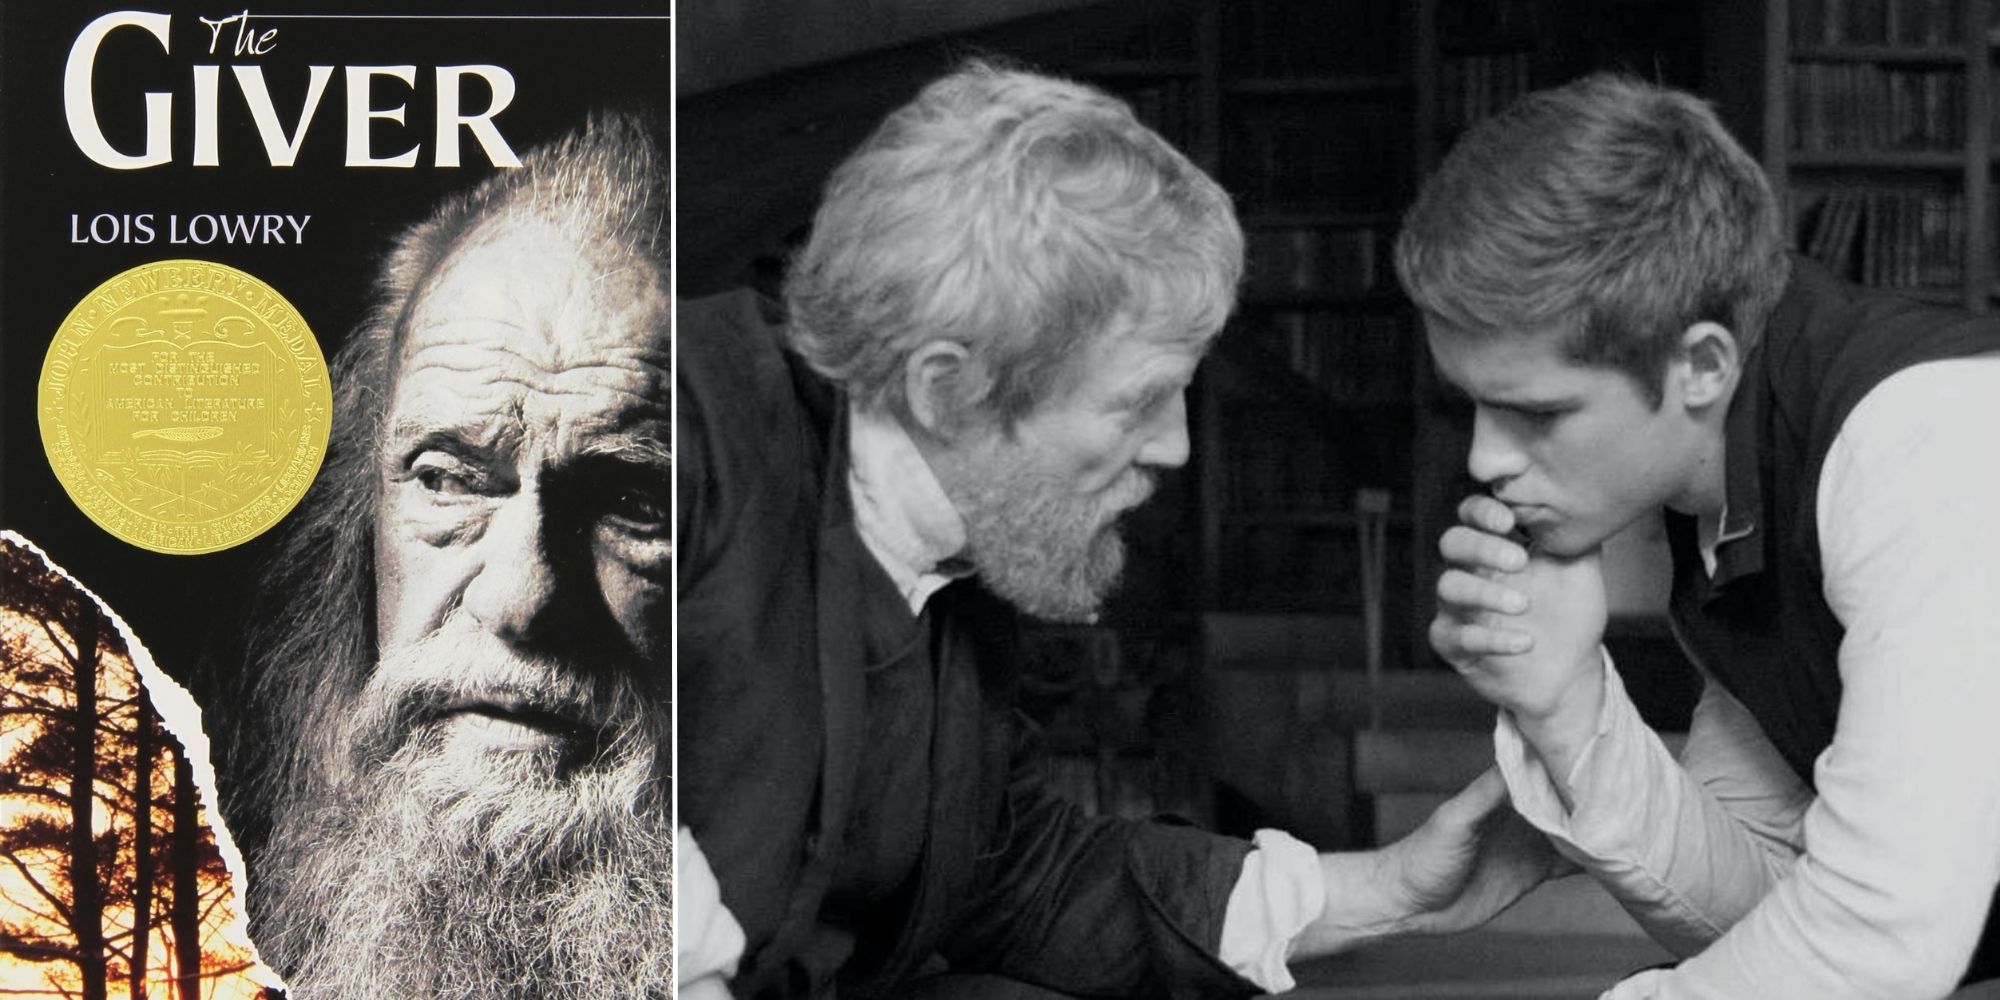 Lois Lowry's The Giver YA novel and the movie adaptation